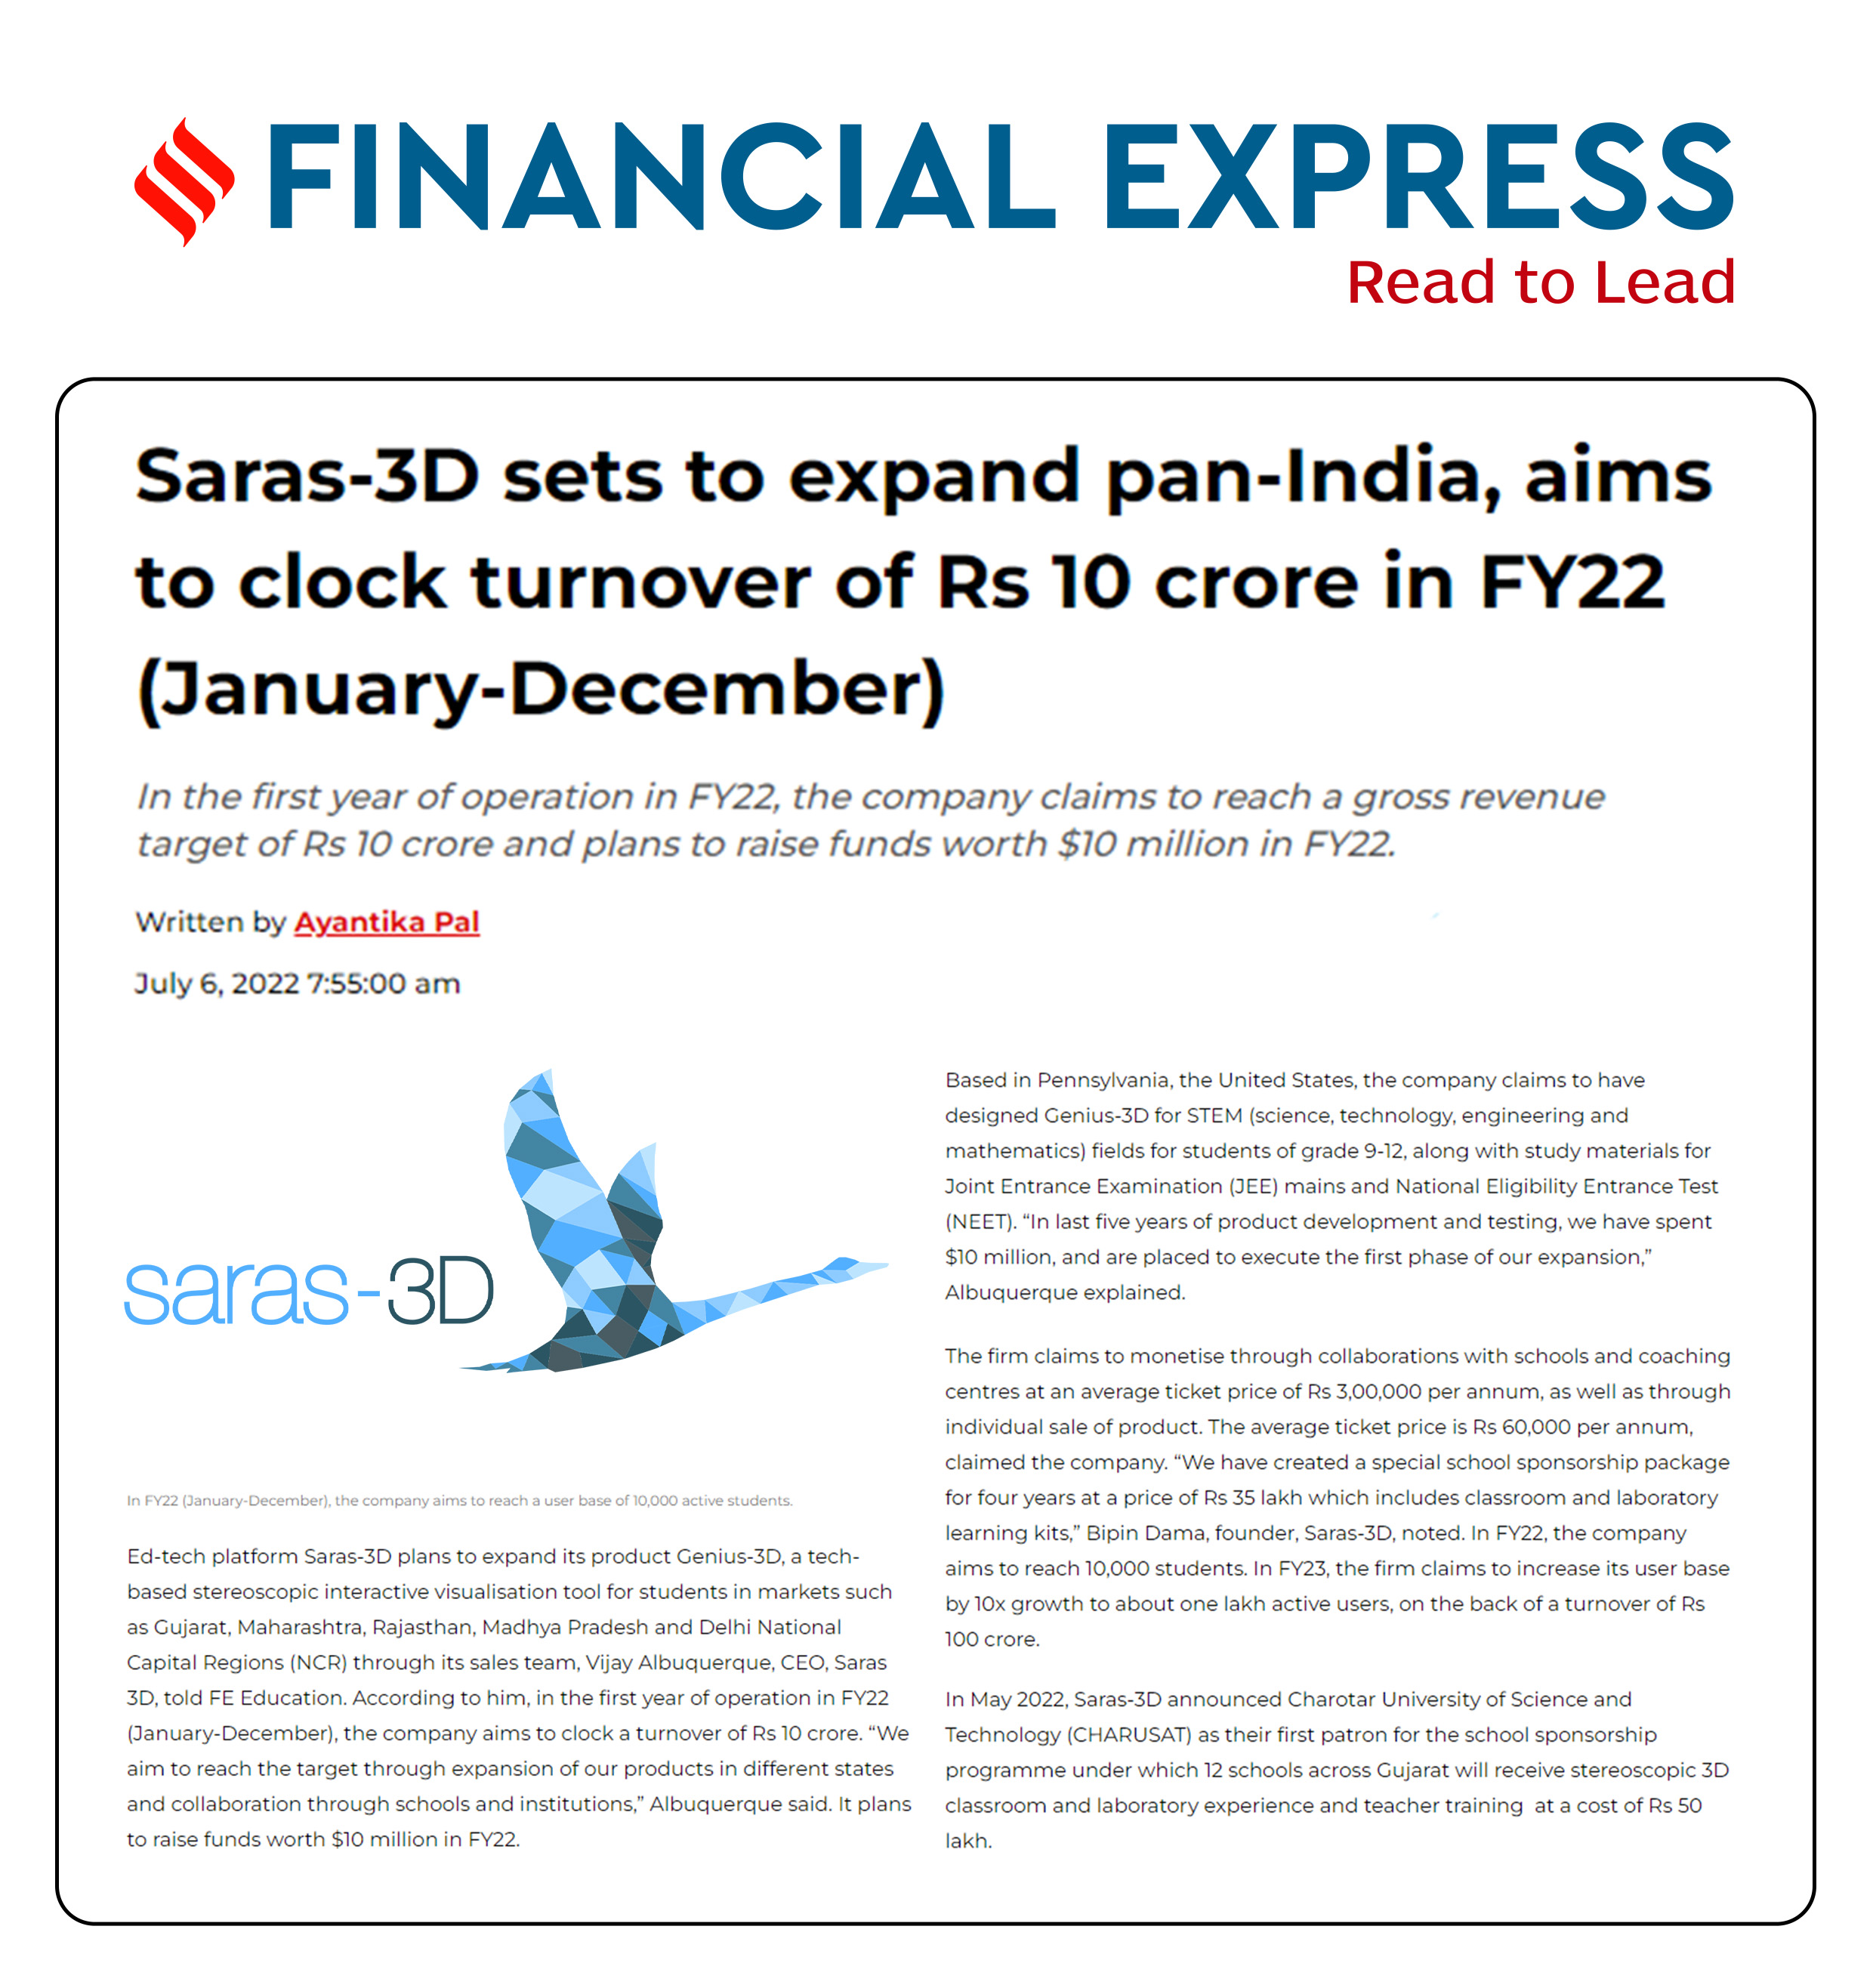 Saras-3D sets to expand pan-India, aims to clock a turnover of Rs. 10 crore in FY22 (January-December).